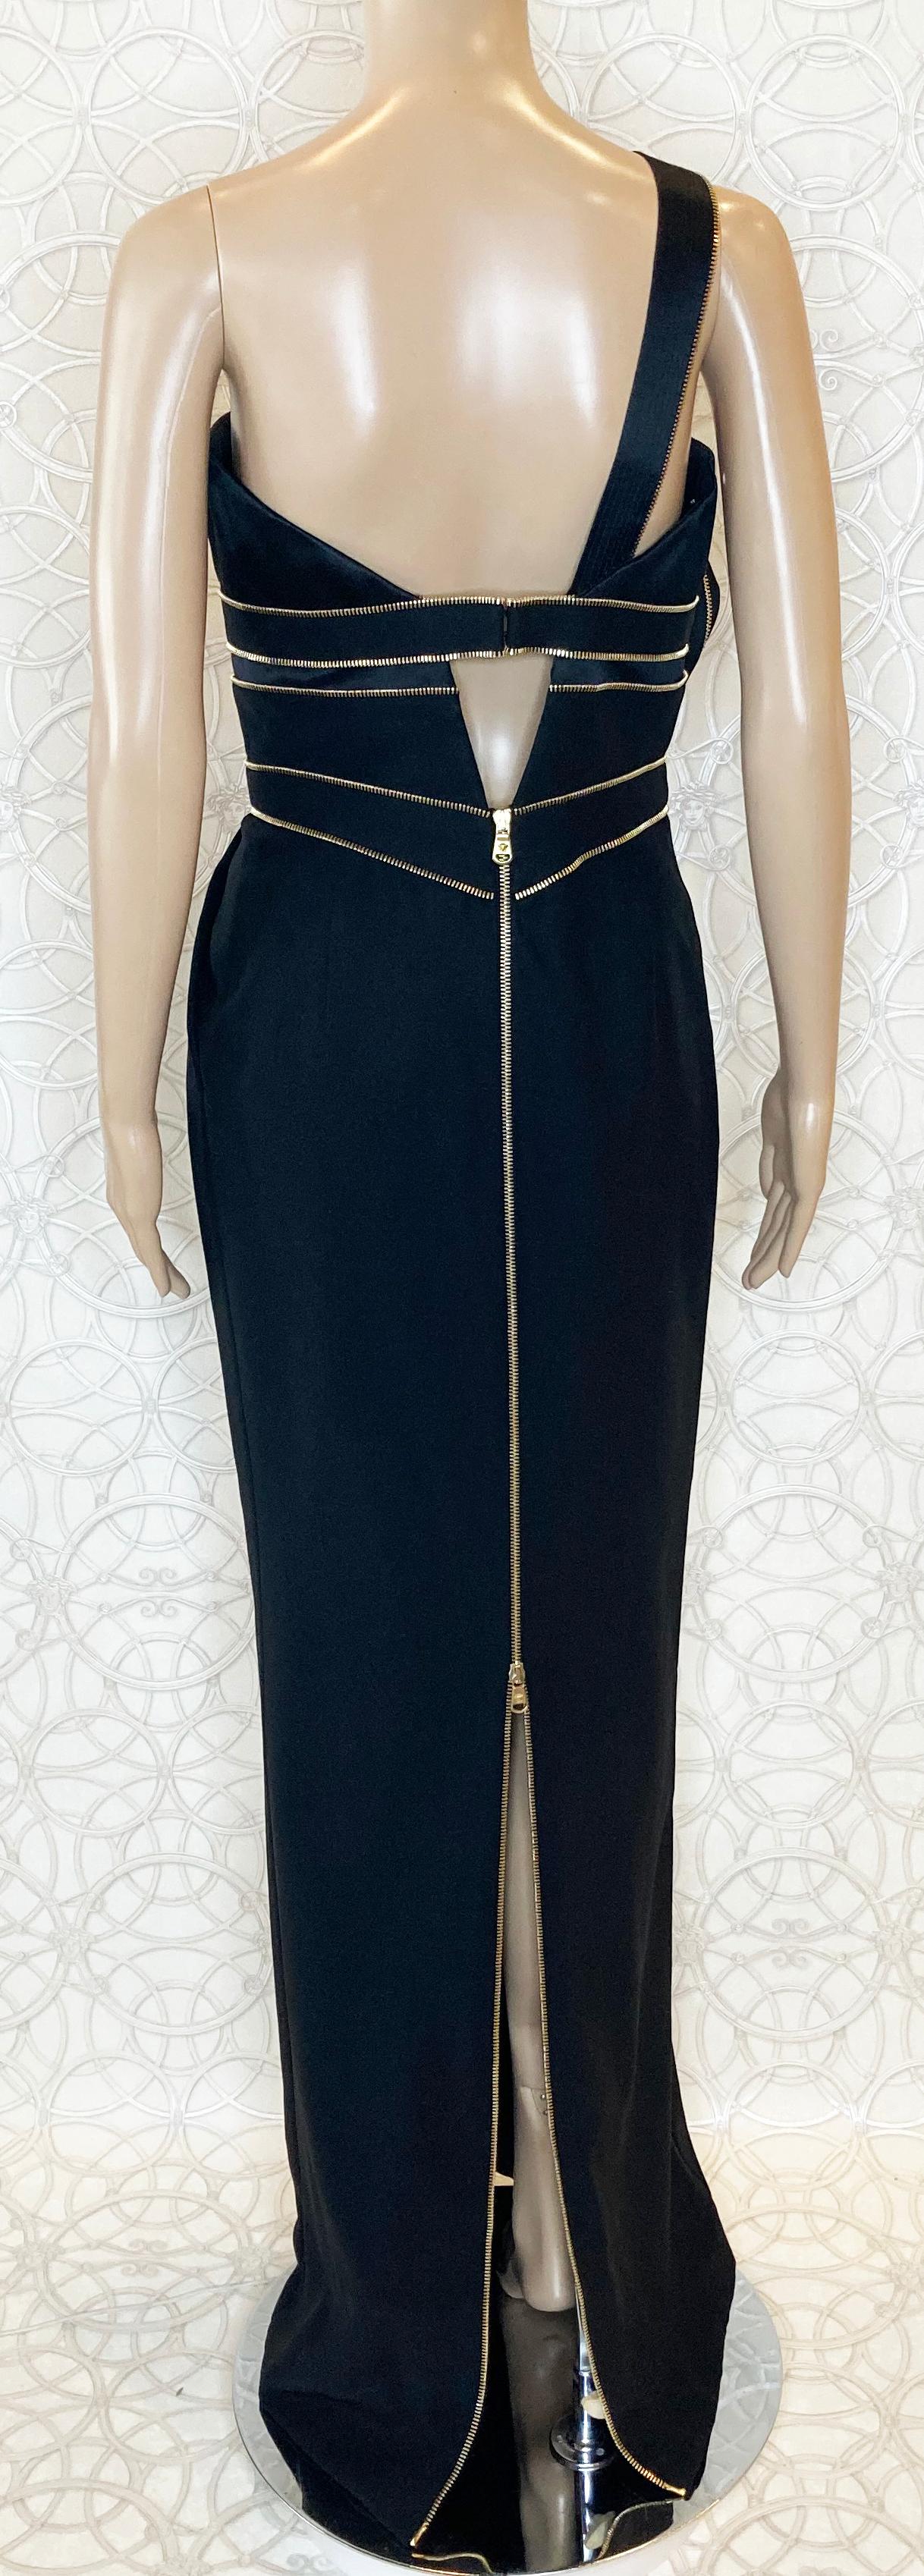 S/2009 L# 30 VERSACE ONE SHOULDER BLACK SILK LONG DRESS GOWN With HEART 42 - 6 For Sale 3